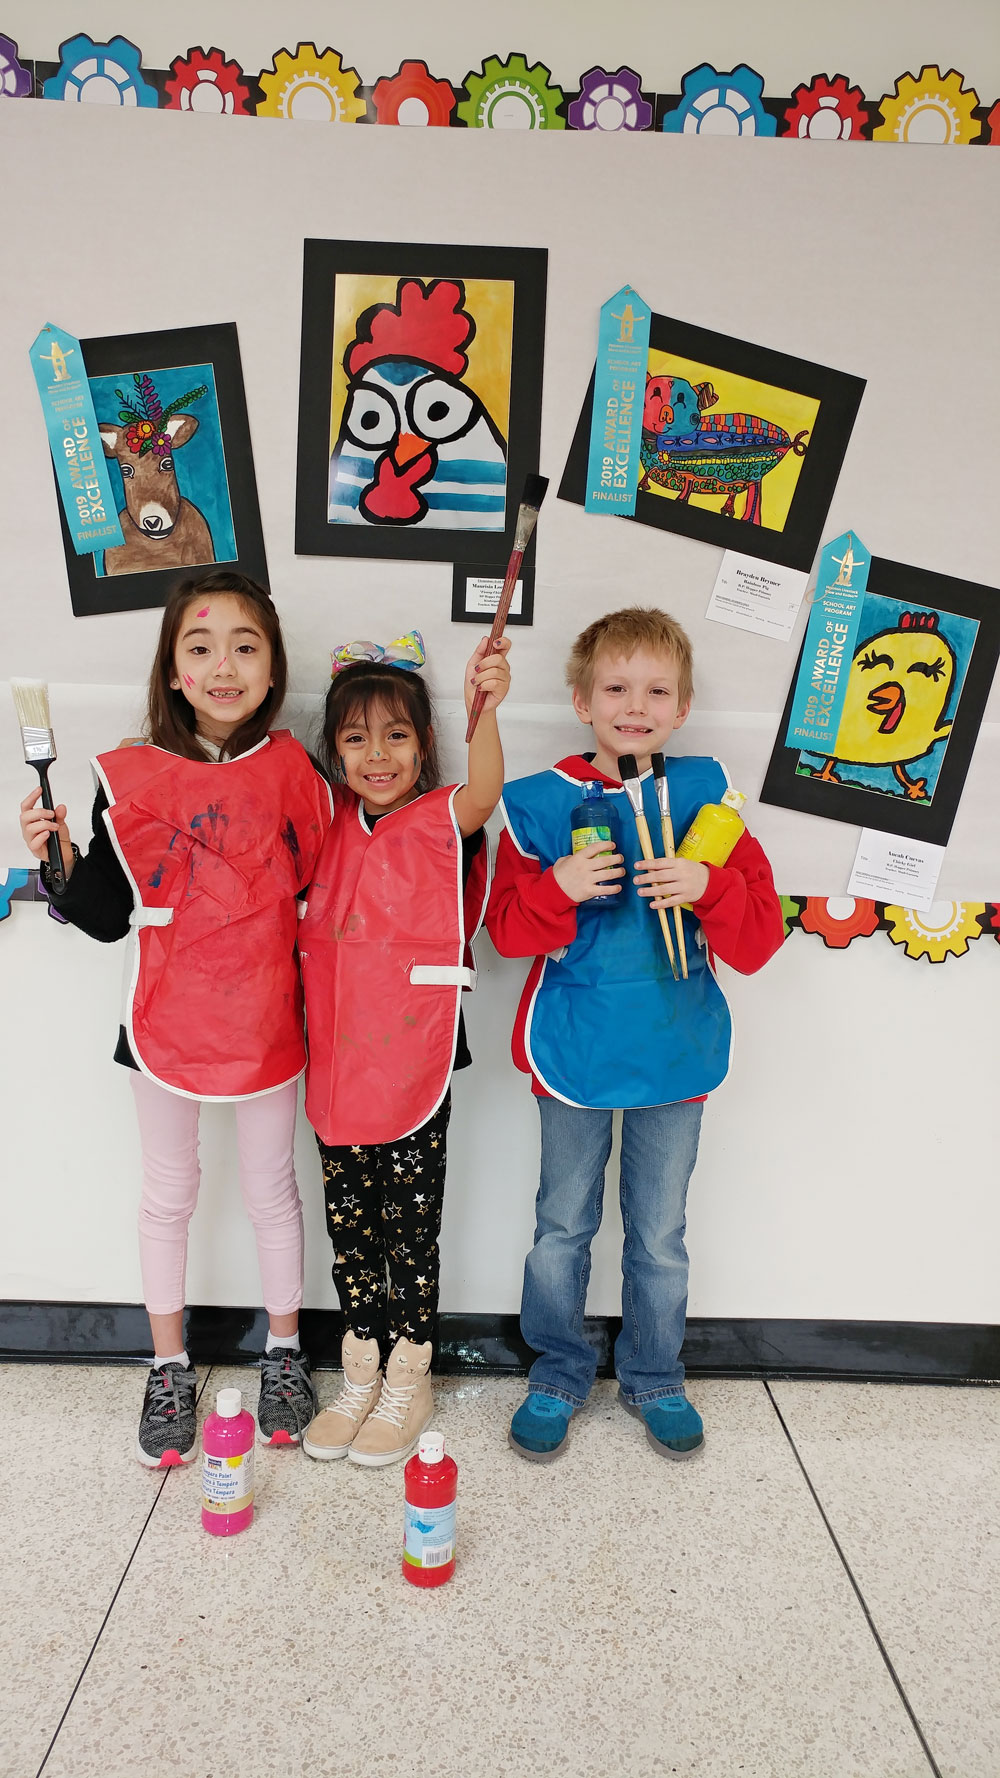 
Four students pose with their artwork
